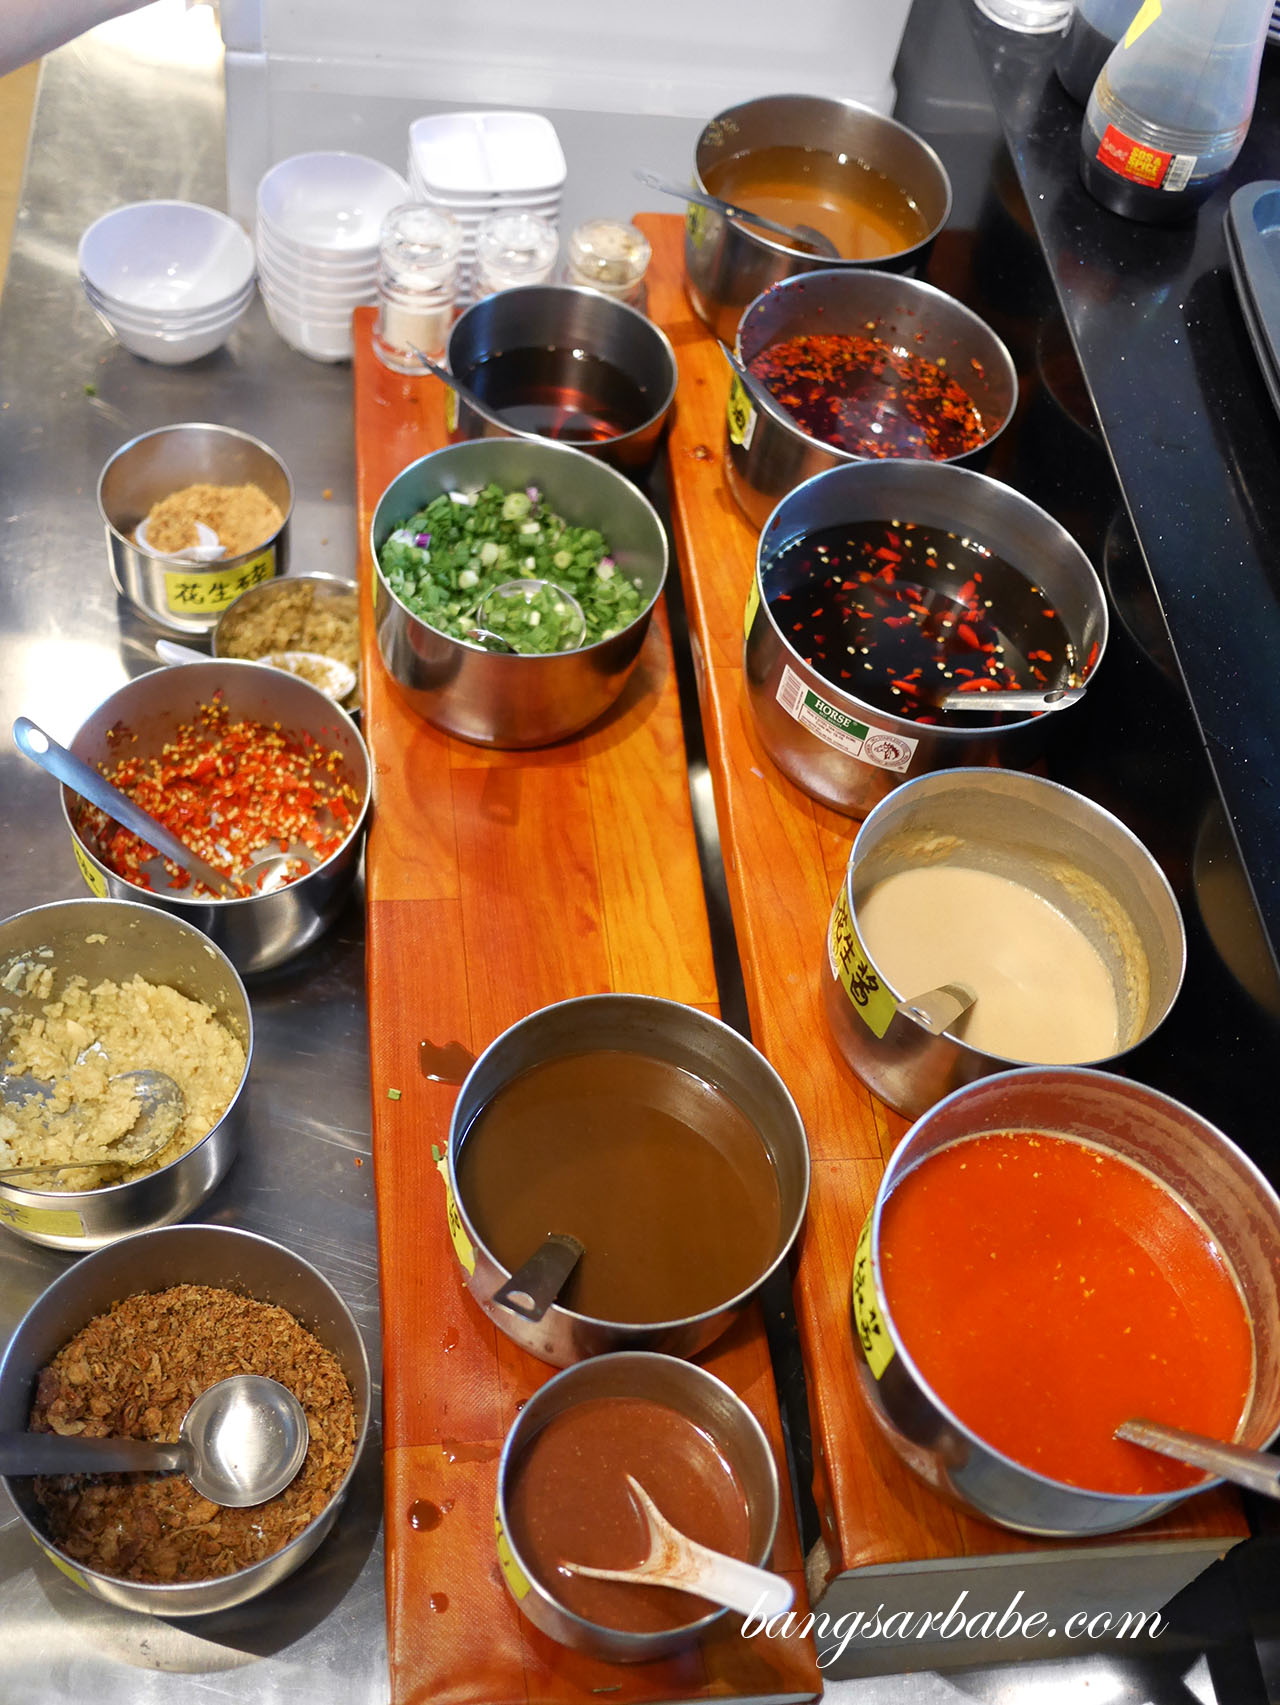 Assorted condiments for dipping sauce